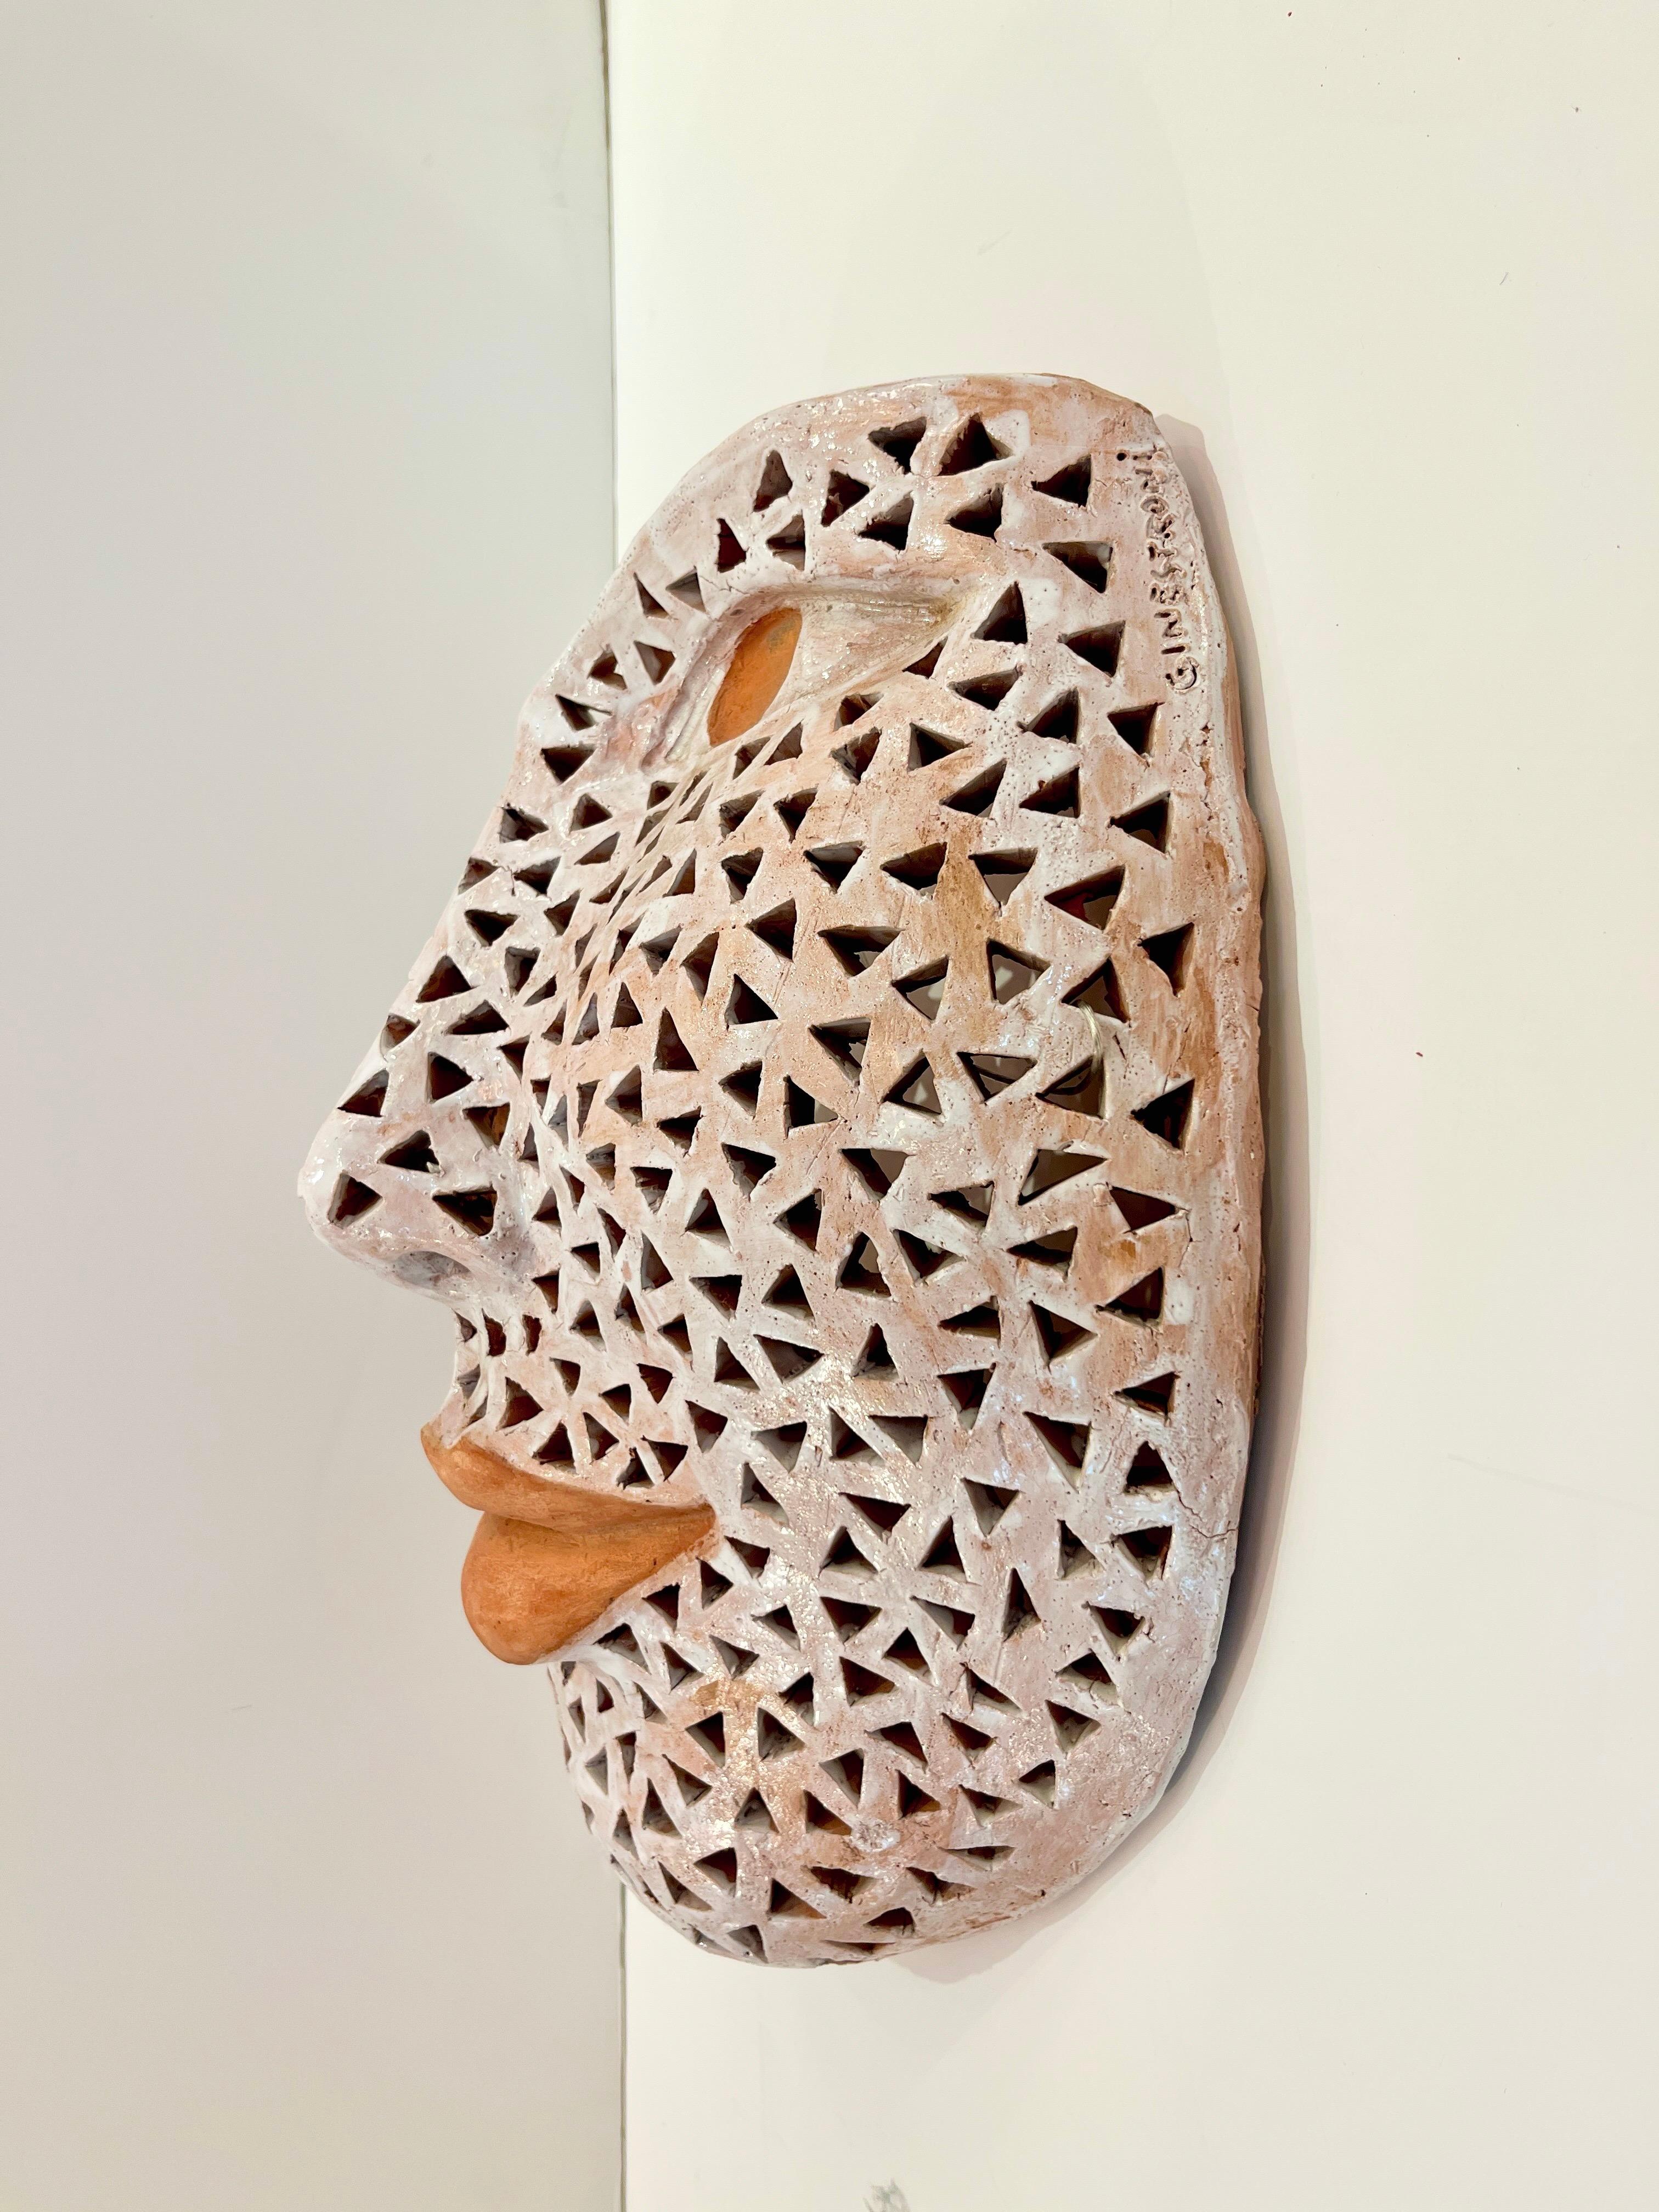 Hand-Painted Italian Modern Perforated White Enameled Terracotta Wall Sculpture by Ginestroni